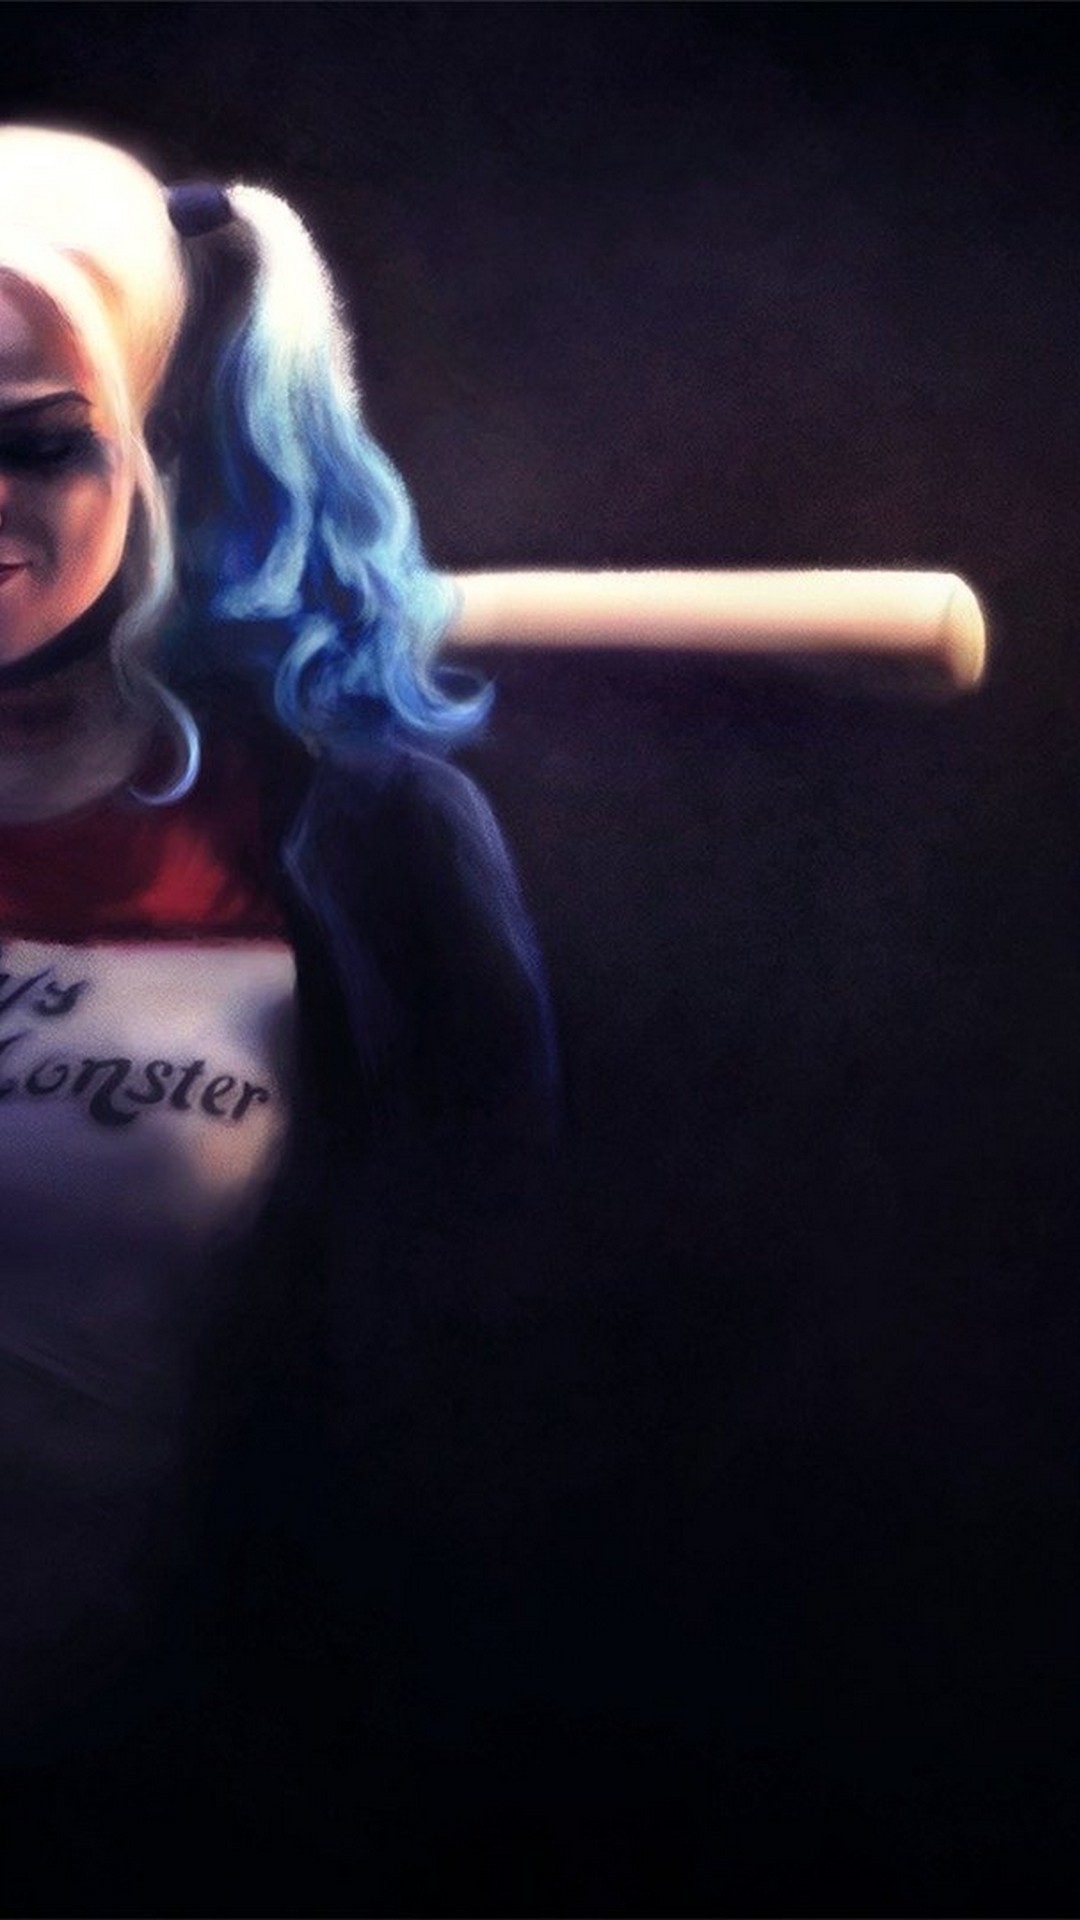 1080x1920 iPhone Wallpaper Pictures Of Harley Quinn with image resolution   pixel. You can make this